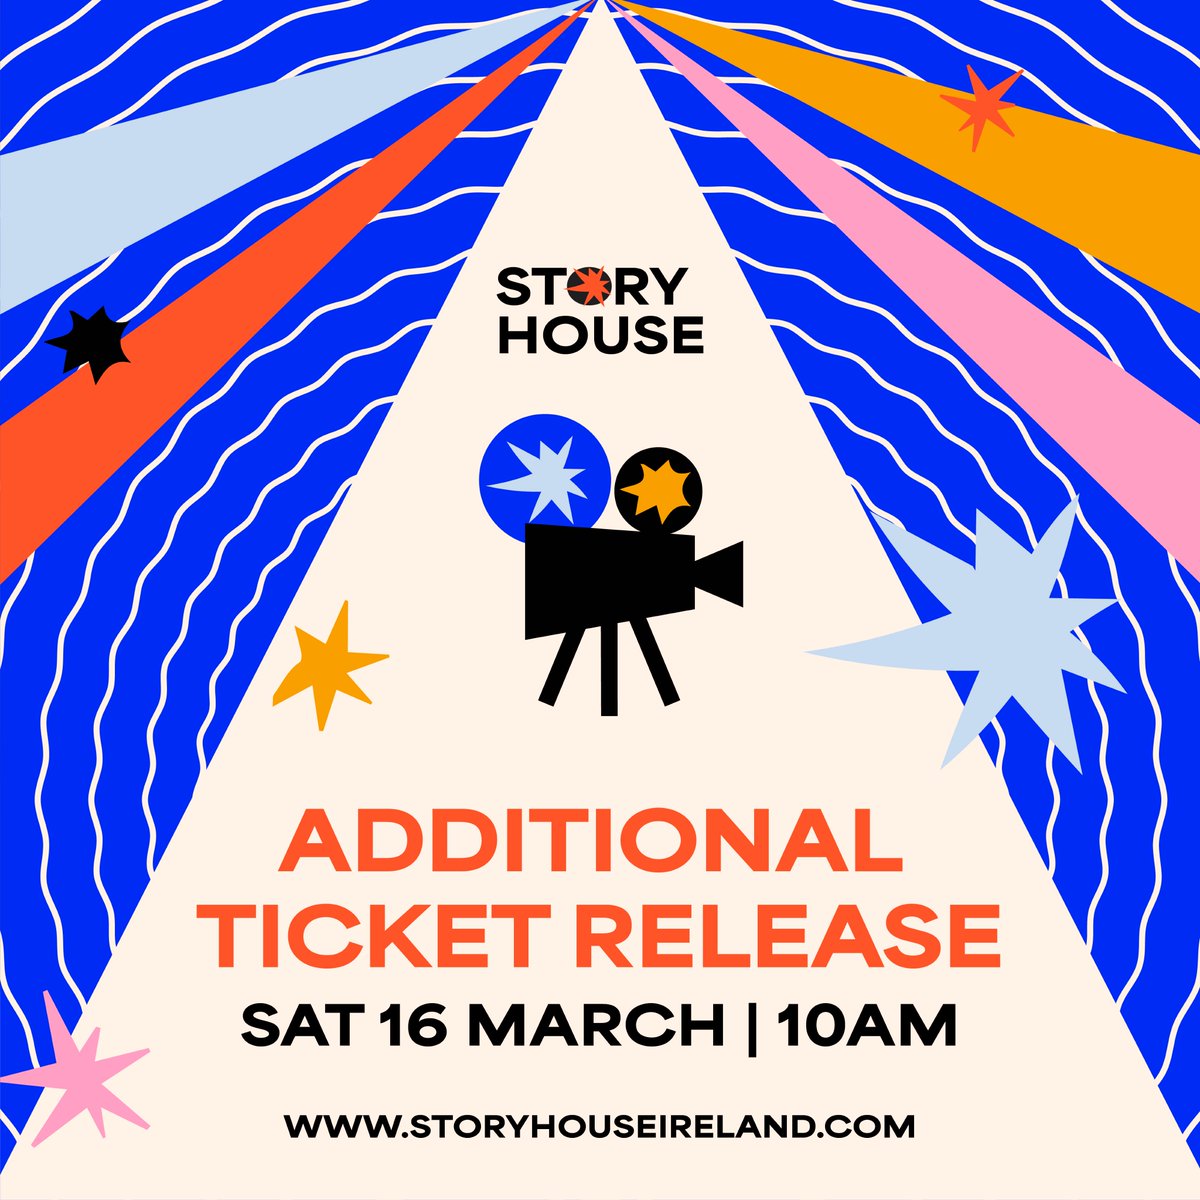 ❗️ IMPORTANT ❗️ A limited number of additional tickets for @storyhouseire will be going on sale this Saturday 16 March at 10am. So, set your reminders now as they will go fast! ➡️storyhouseireland.com #STORYHOUSEDUBLIN